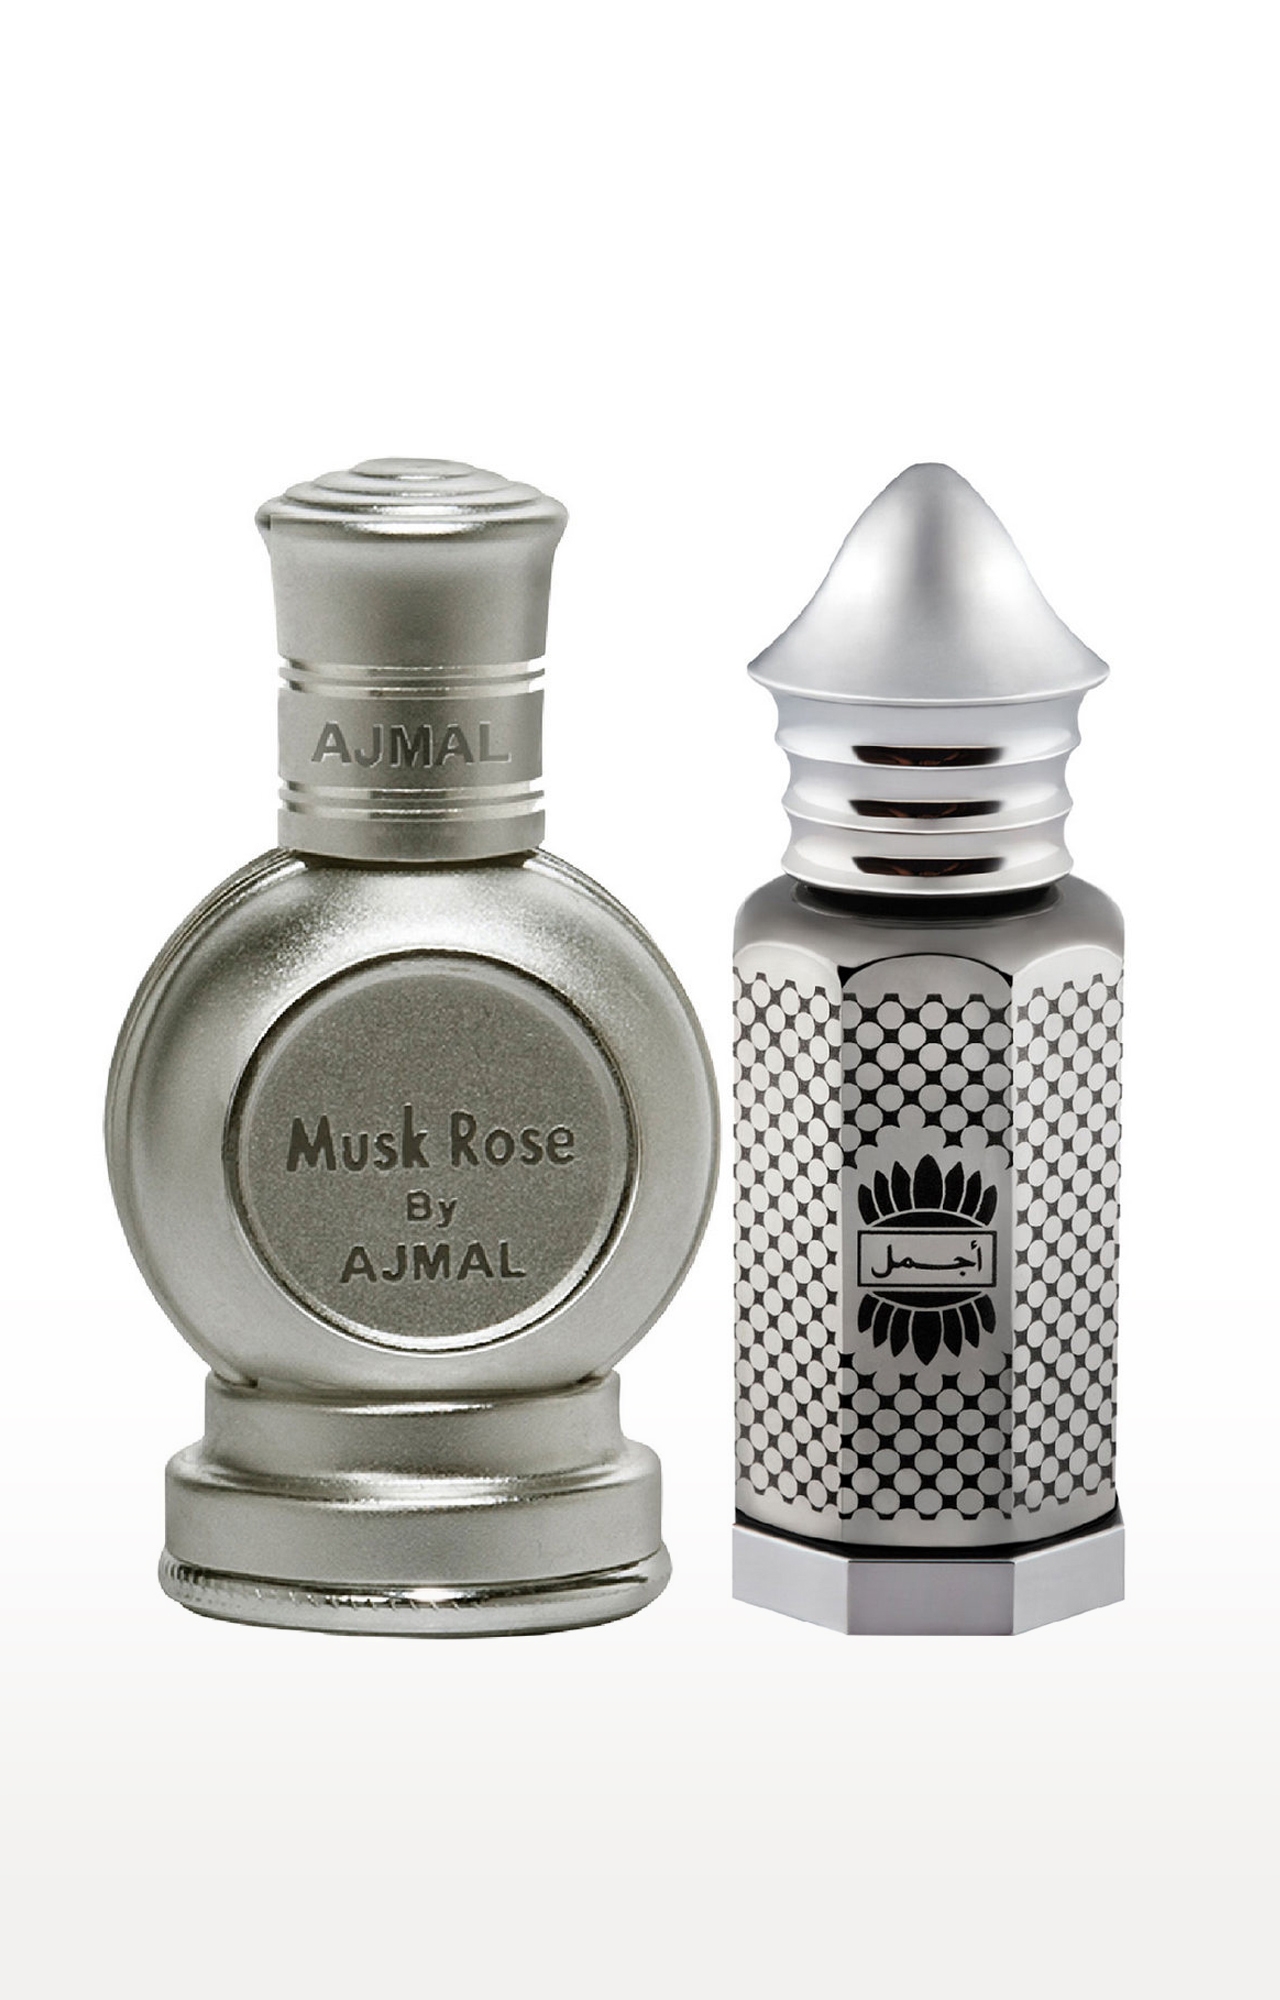 Ajmal | Ajmal Musk Rose Concentrated Perfume Oil Floral Musky Alcohol-free Attar 12ml for Unisex and Asher Concentrated Perfume Oil Oriental Alcohol-free Attar 12ml for Unisex + 2 Parfum Testers FREE